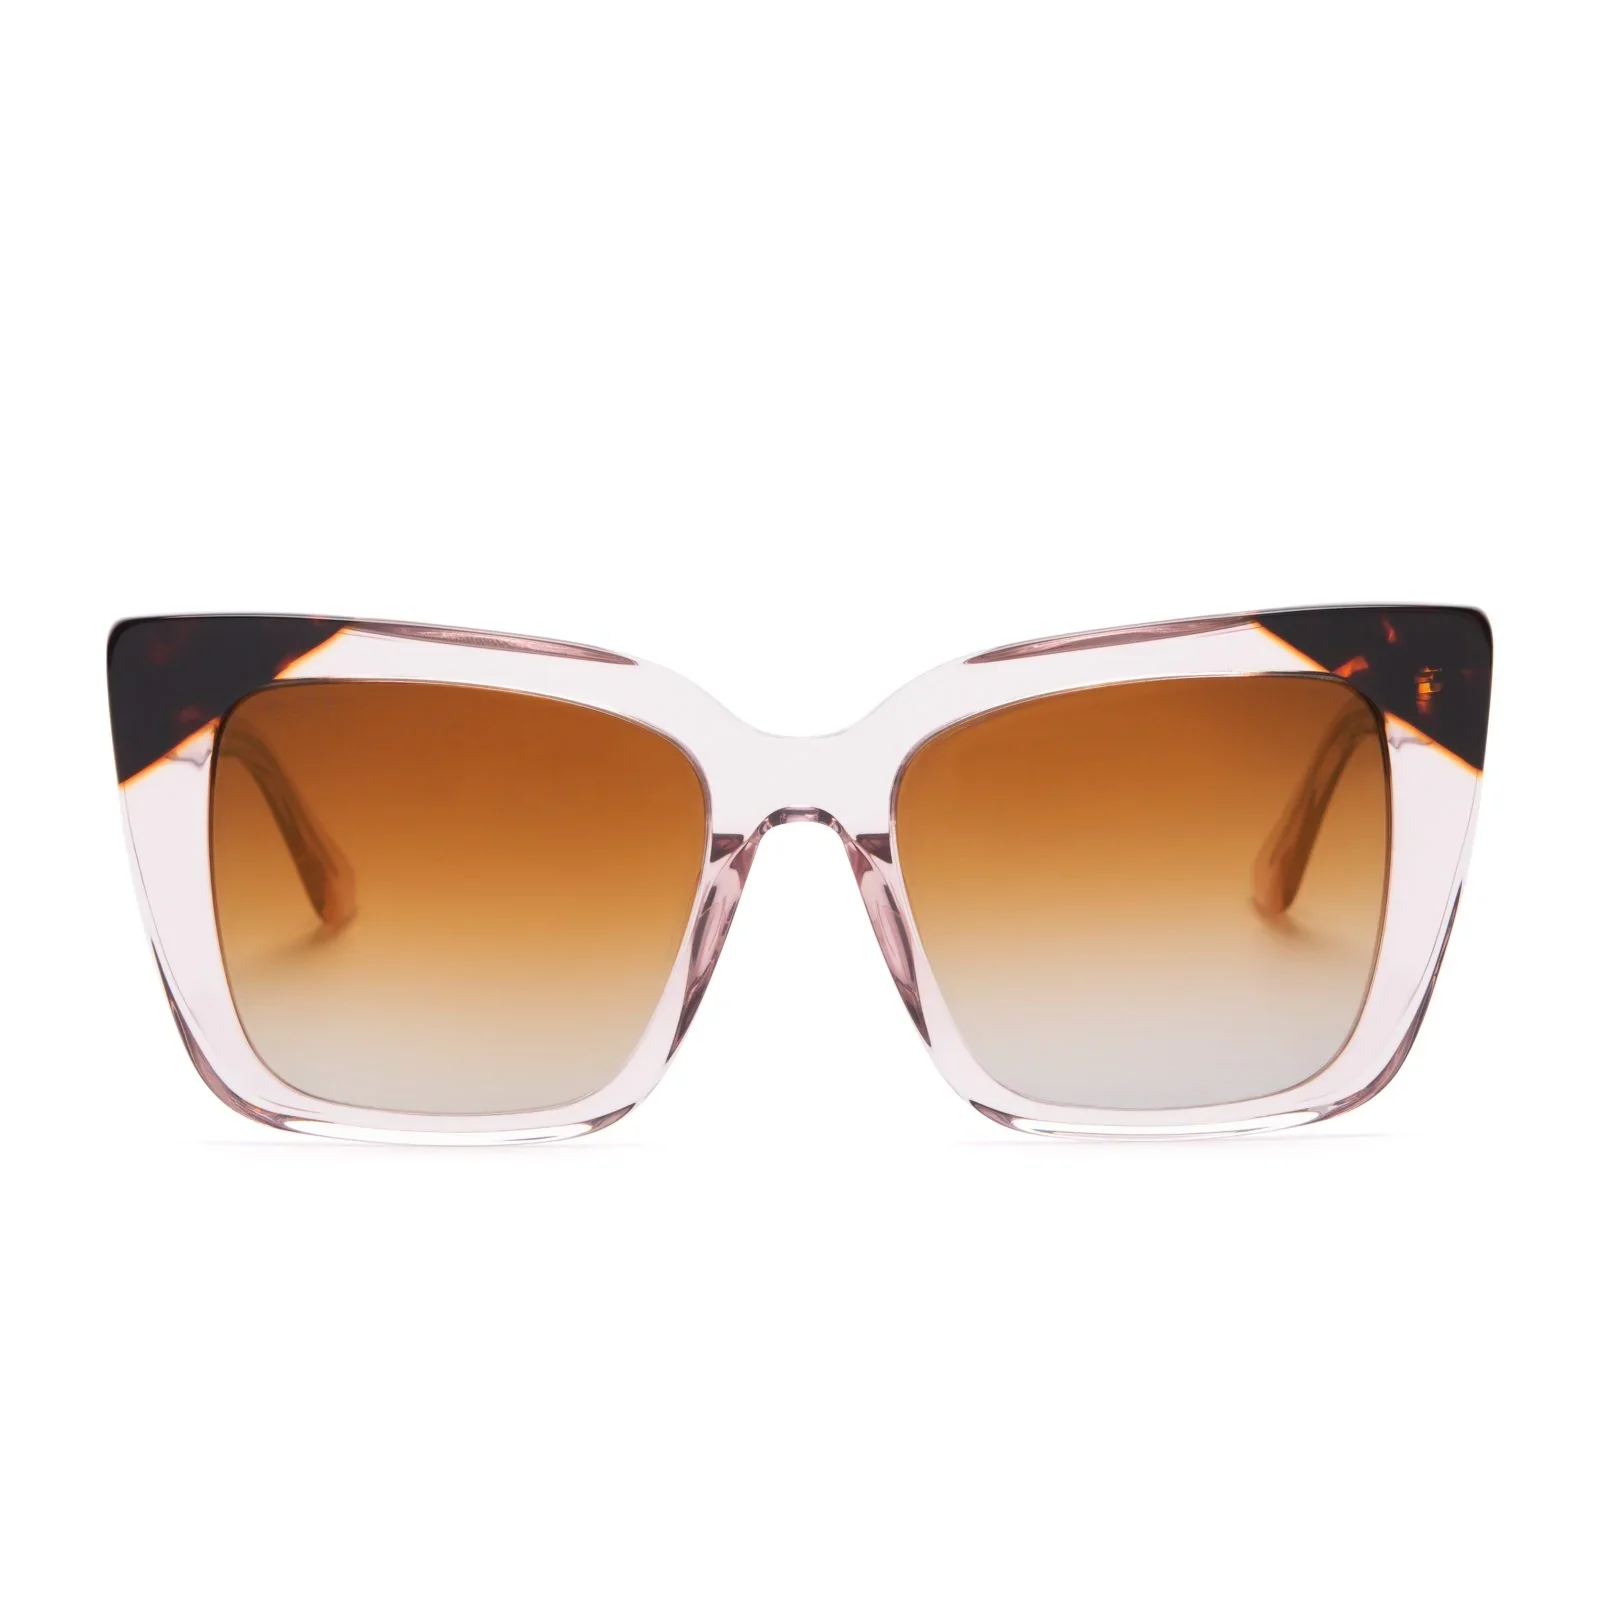 LIZZY - LIGHT PINK CRYSTAL + BROWN GRADIENT SUNGLASSES